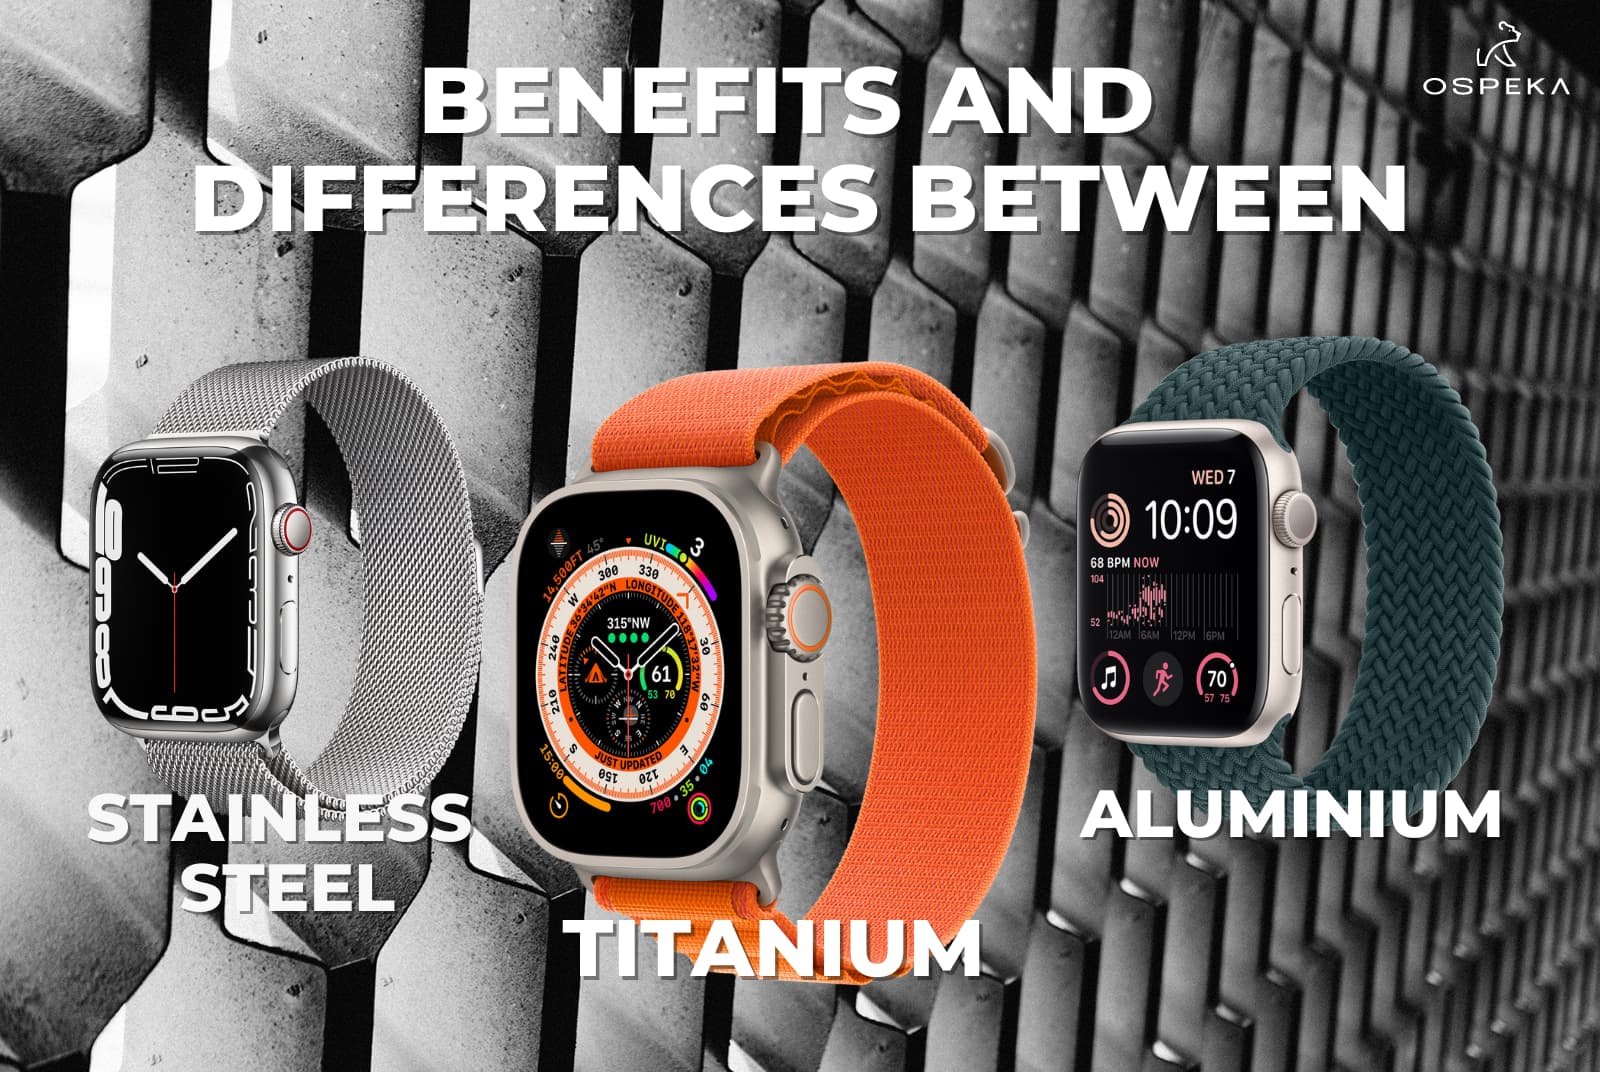 Benefits and differences between Apple Watches